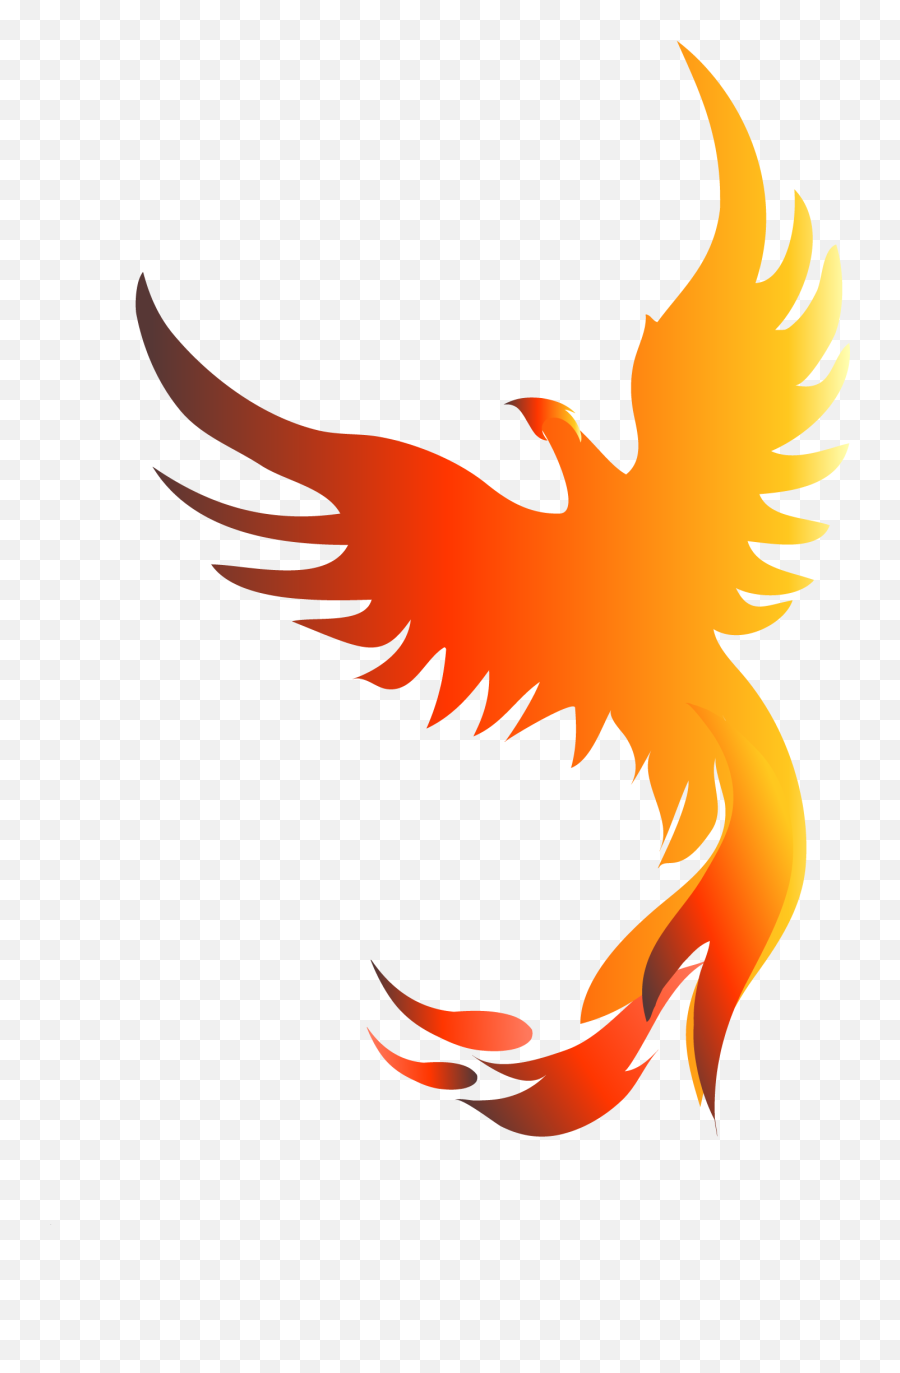 Phoenix Bird Png Image - Phoenix Bird,Phoenix Bird Png